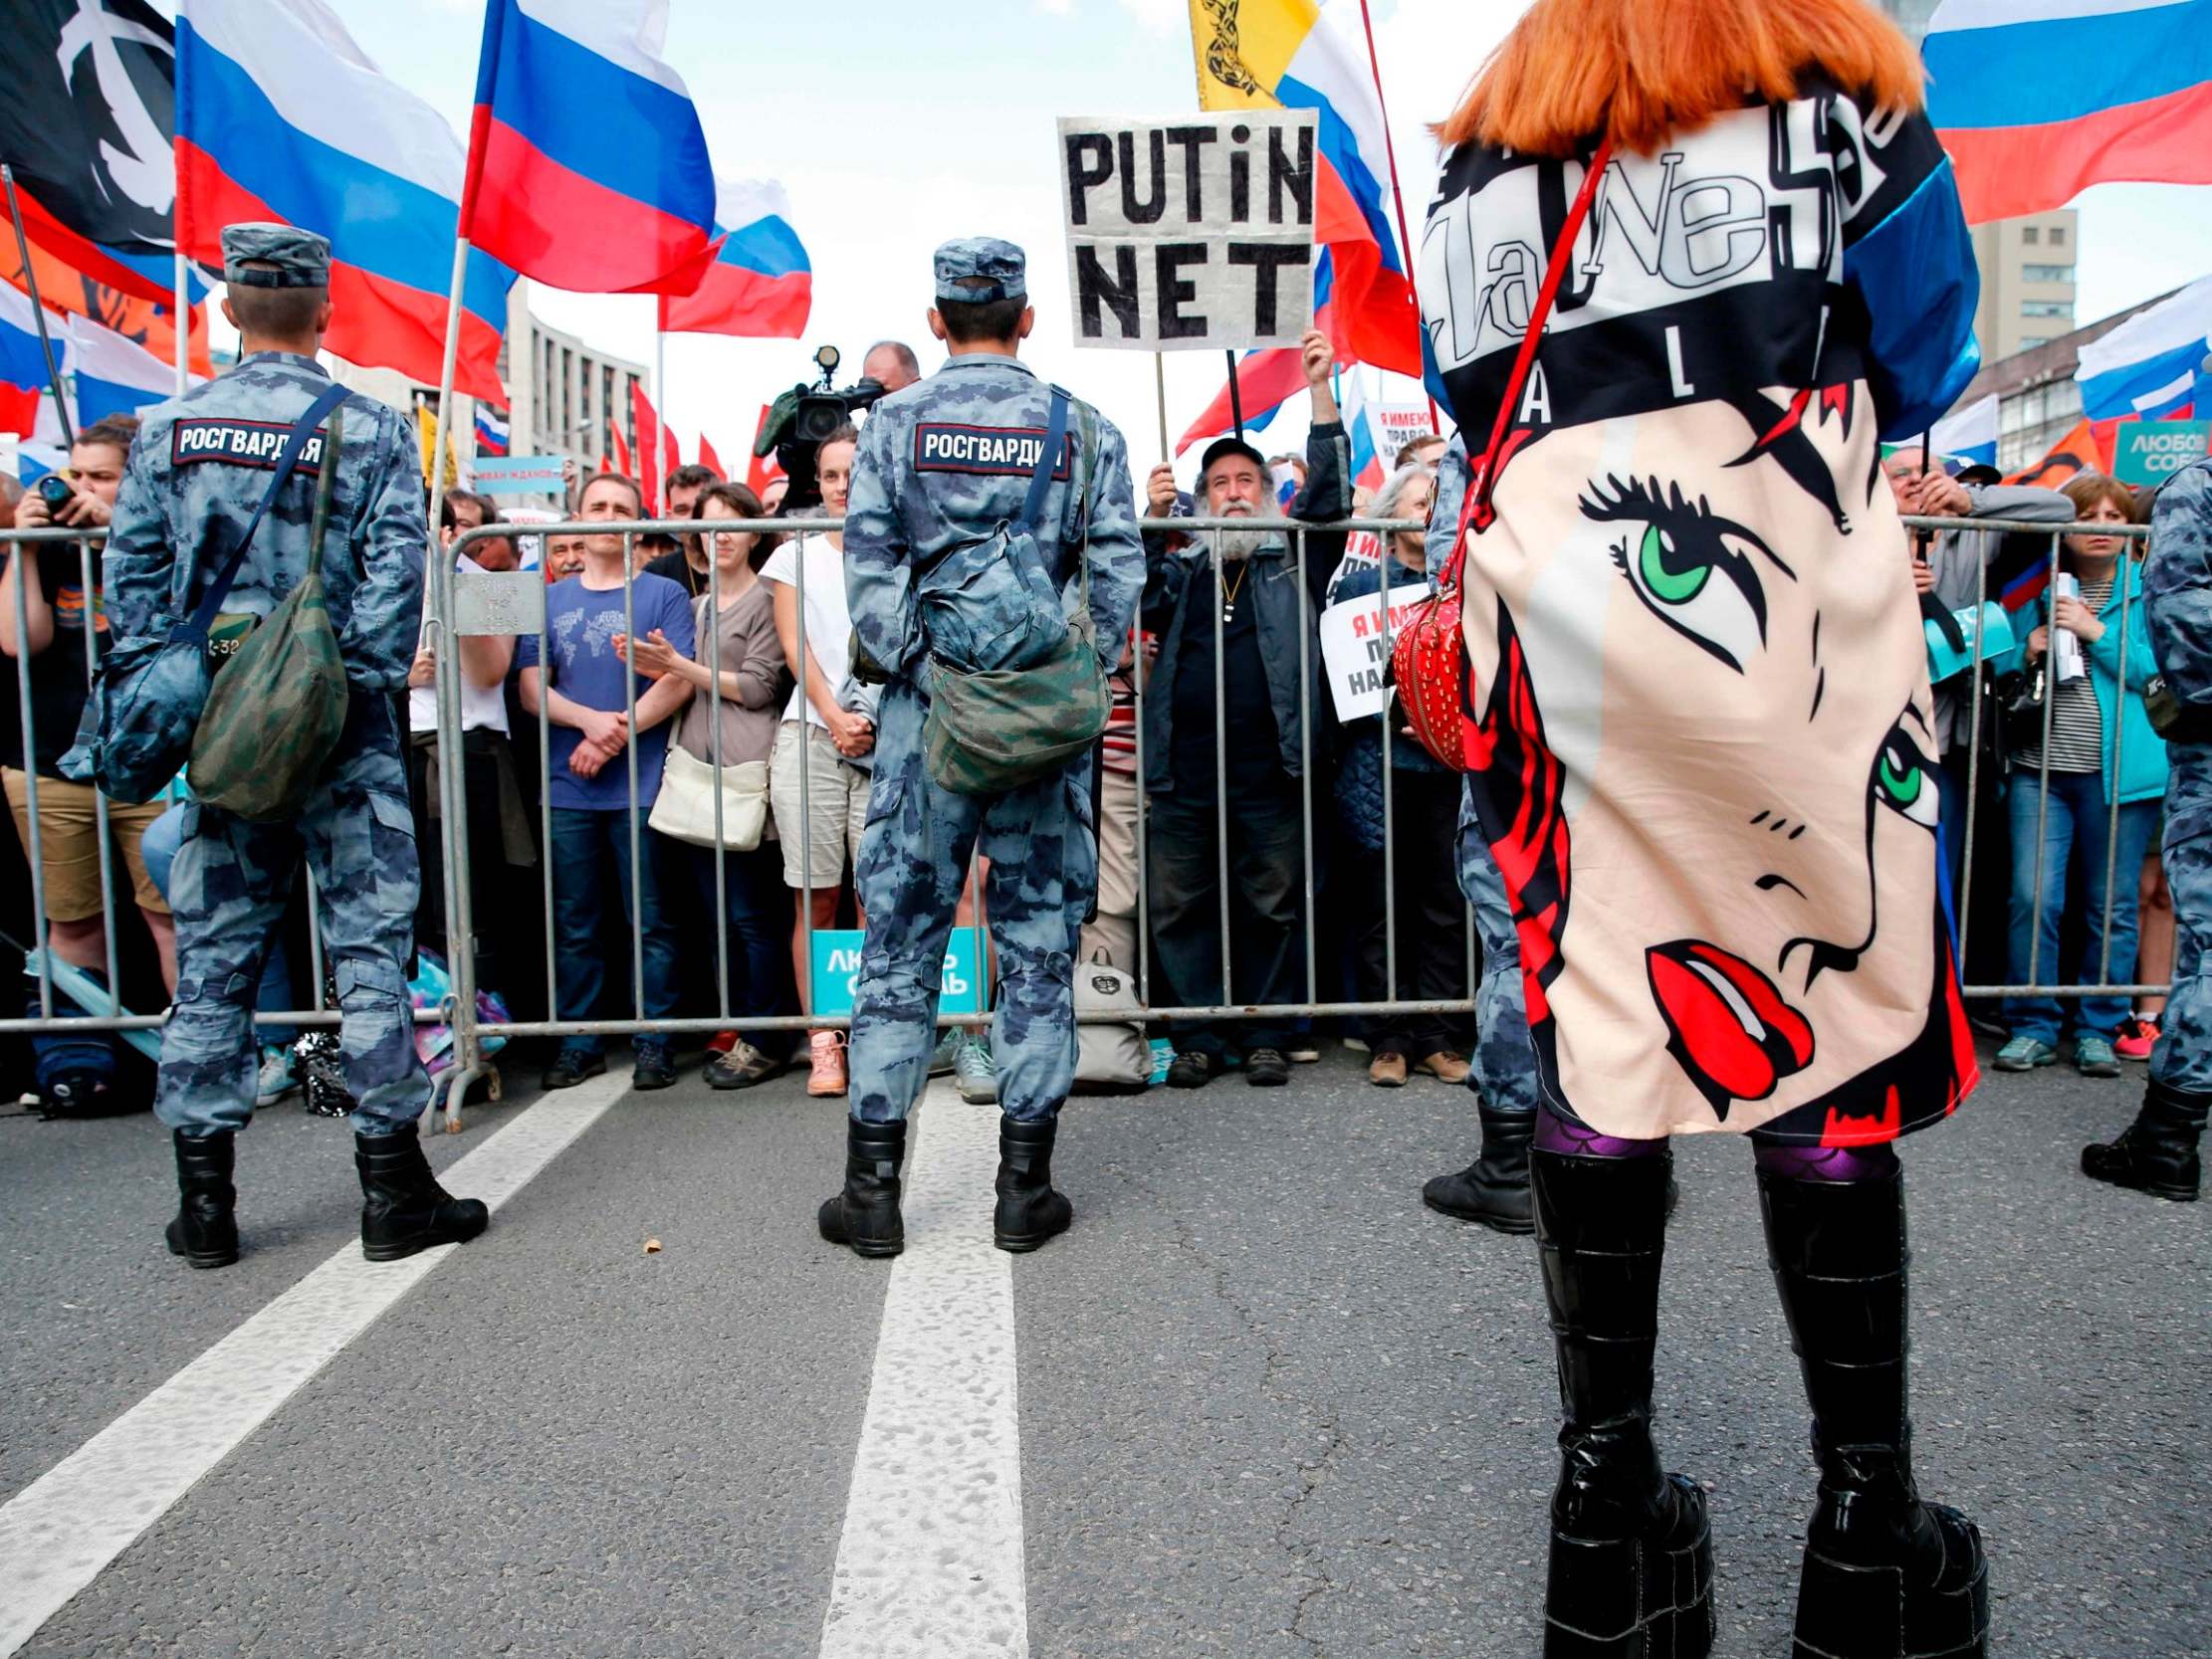 A demonstration in Moscow in support of opposition candidates for the elections this month